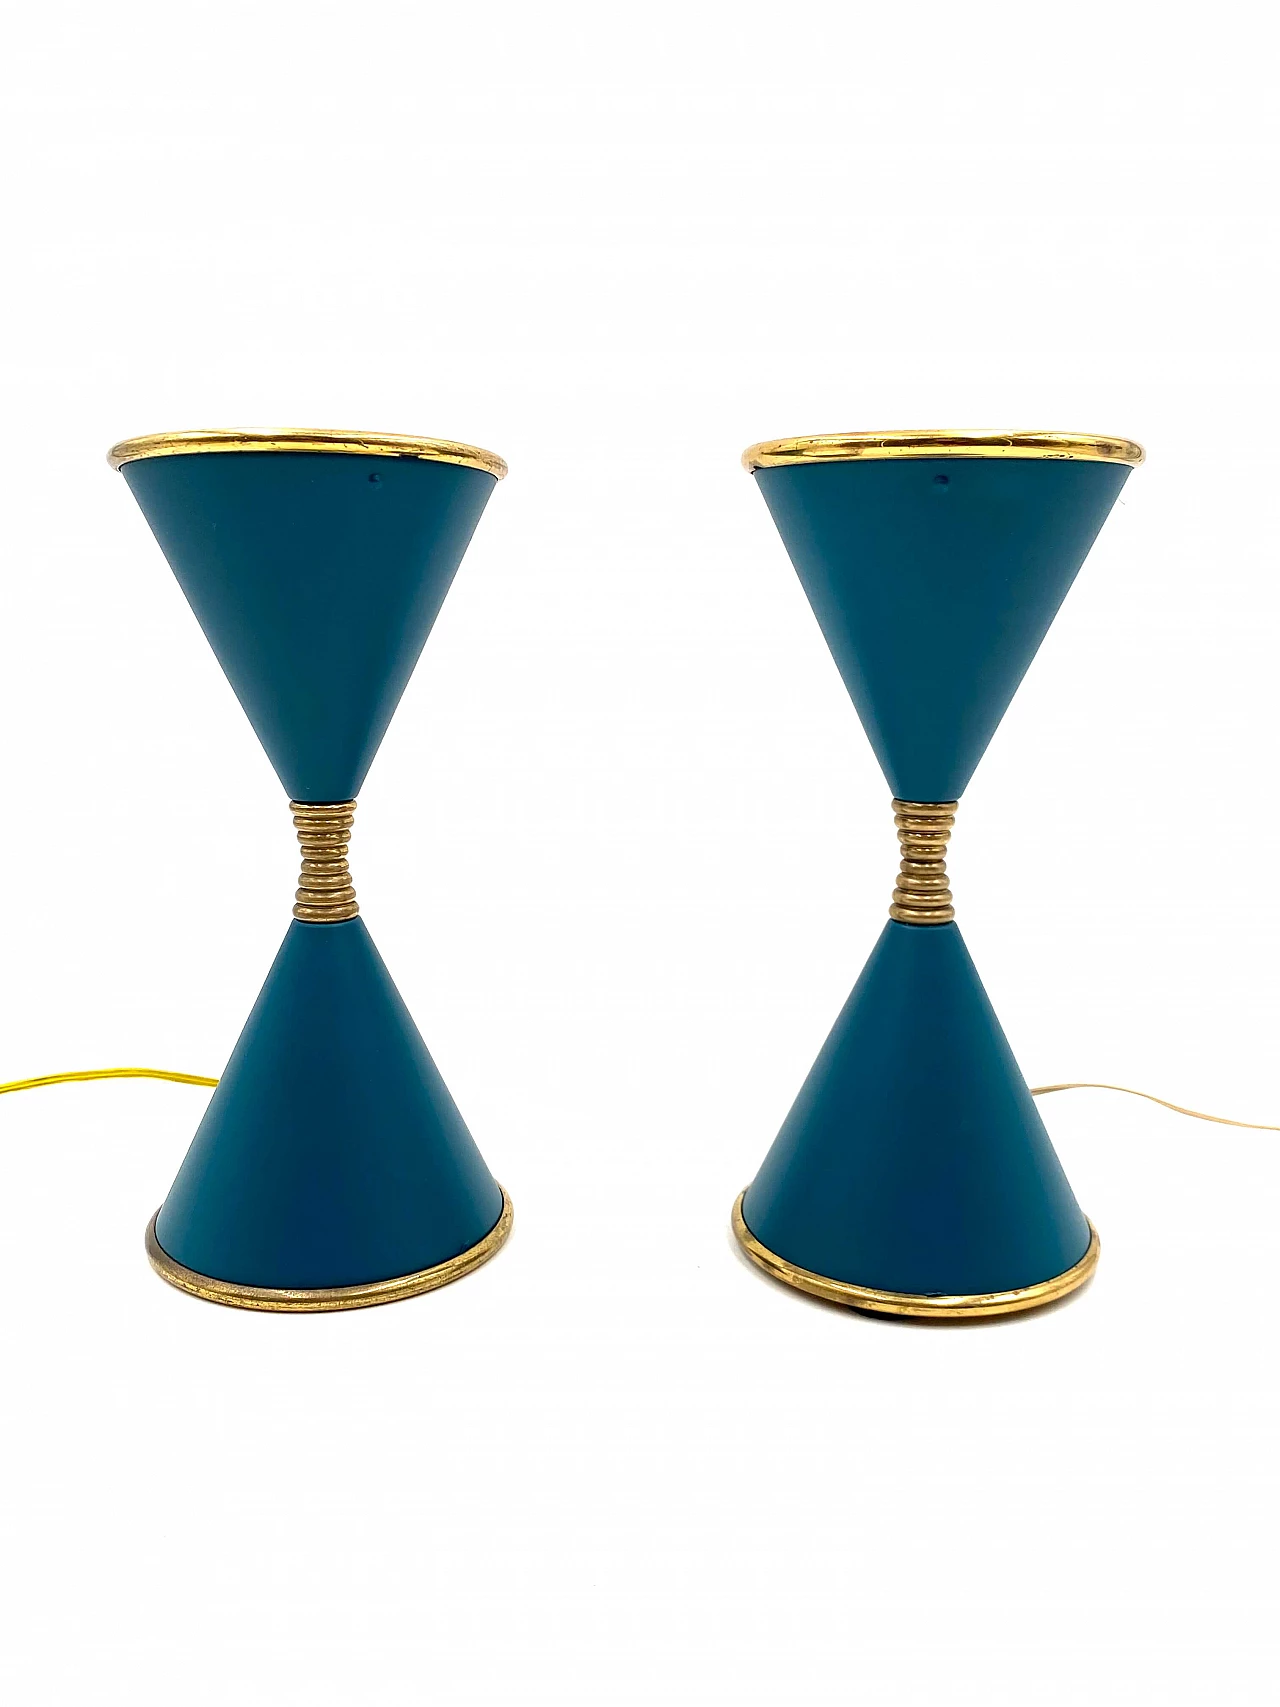 Pair of Clessidra lamps by Angelo Lelii for Arredoluce, 1960s 1201462